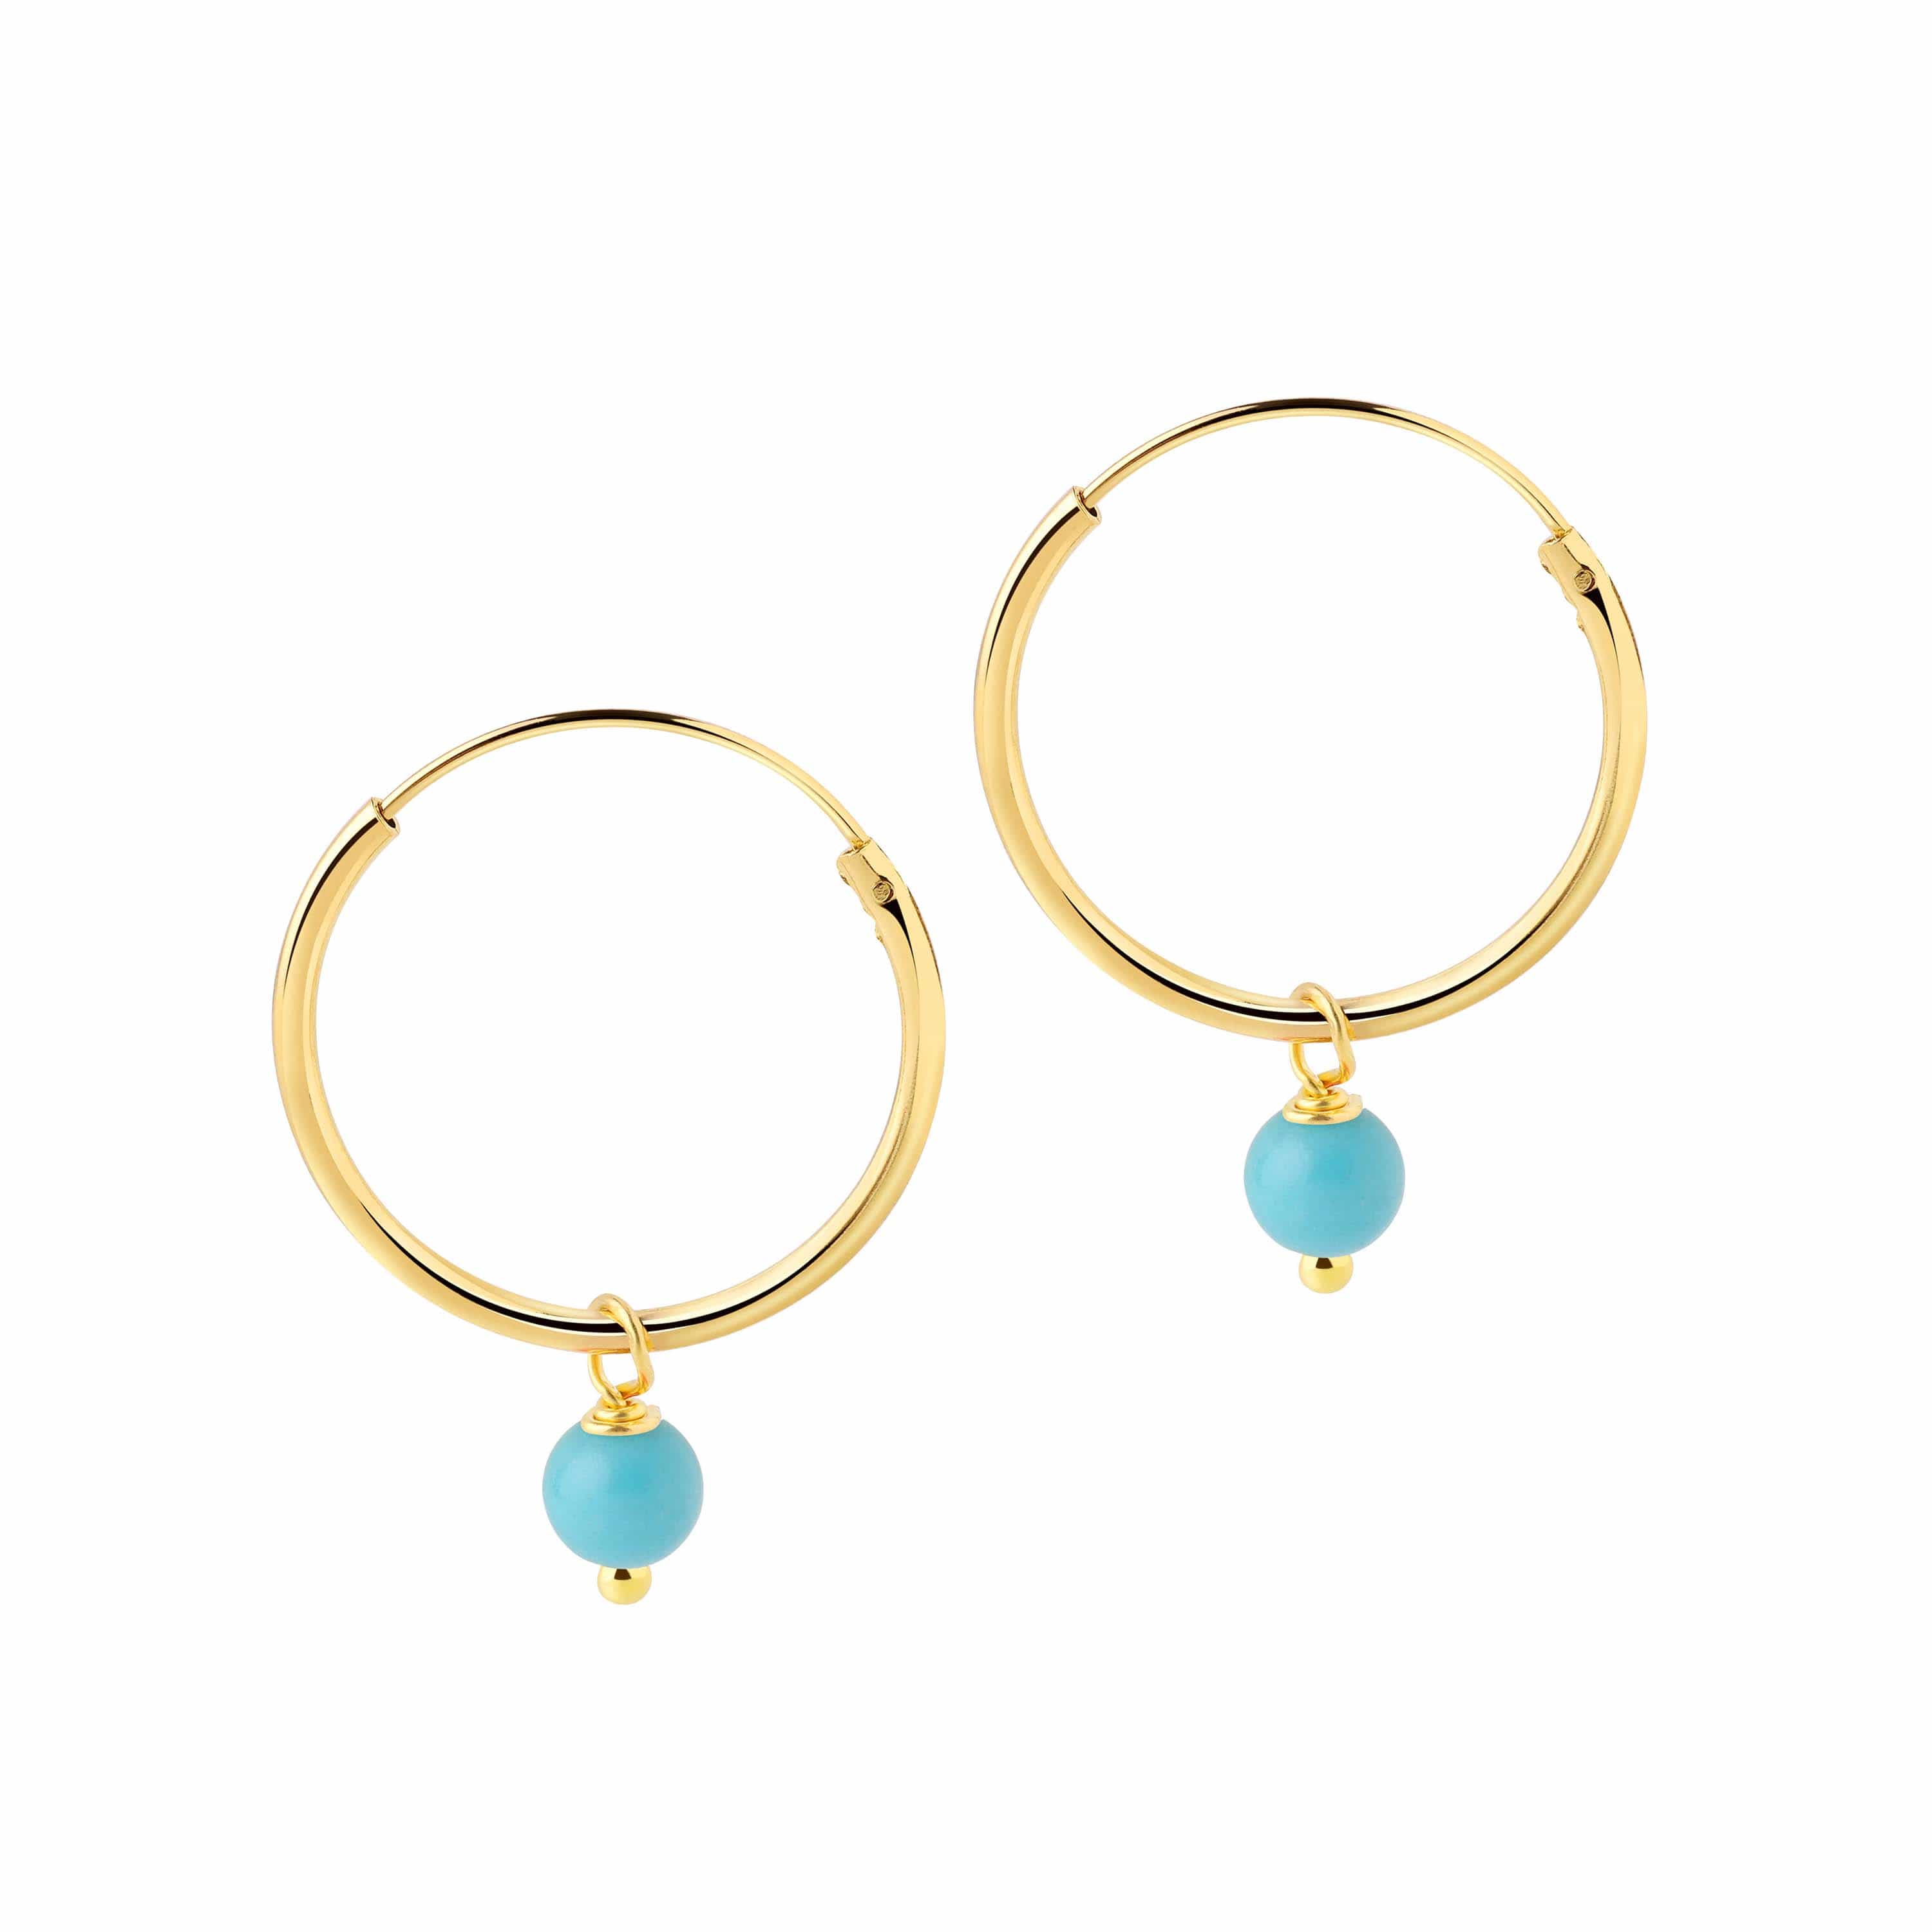 Gold Plated Hoop Earrings with Turquoise Blue Stone